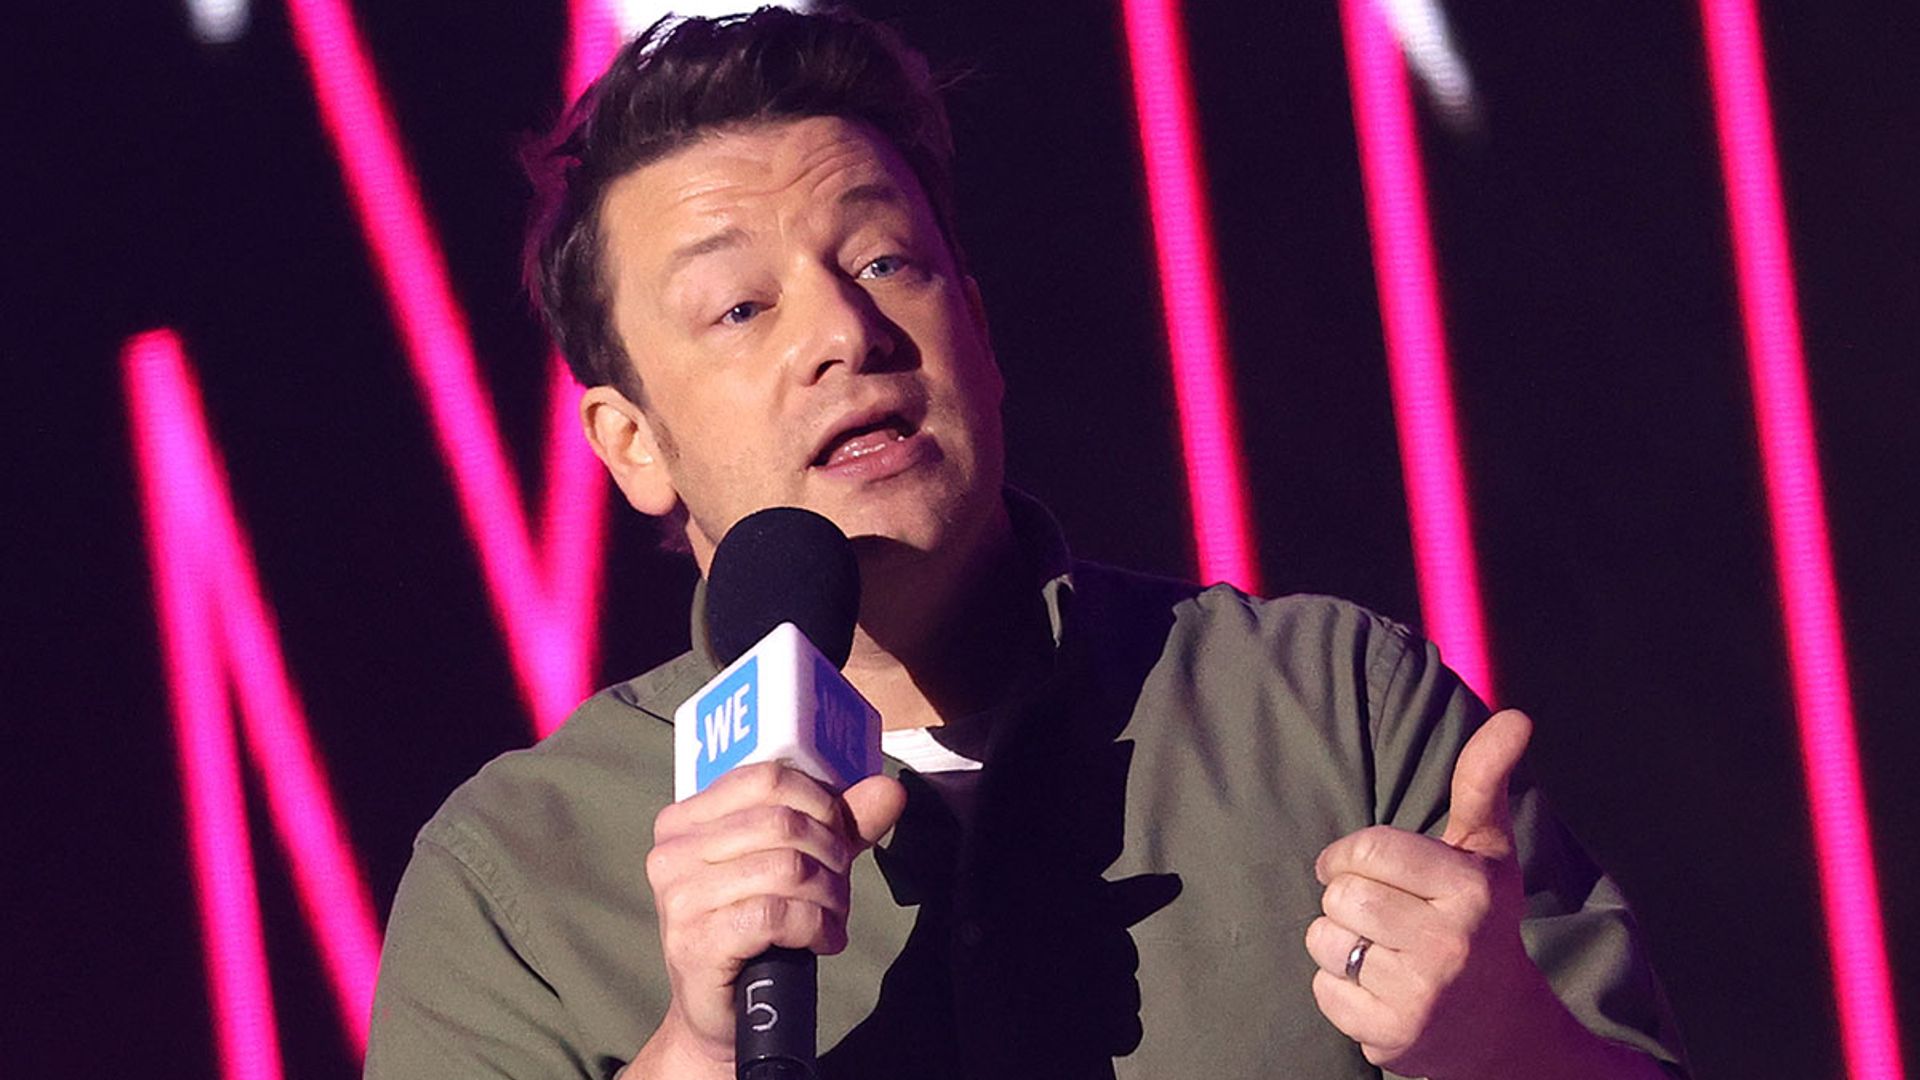 Jamie Oliver responds to criticism over his lockdown appearance in tongue-in-cheek video